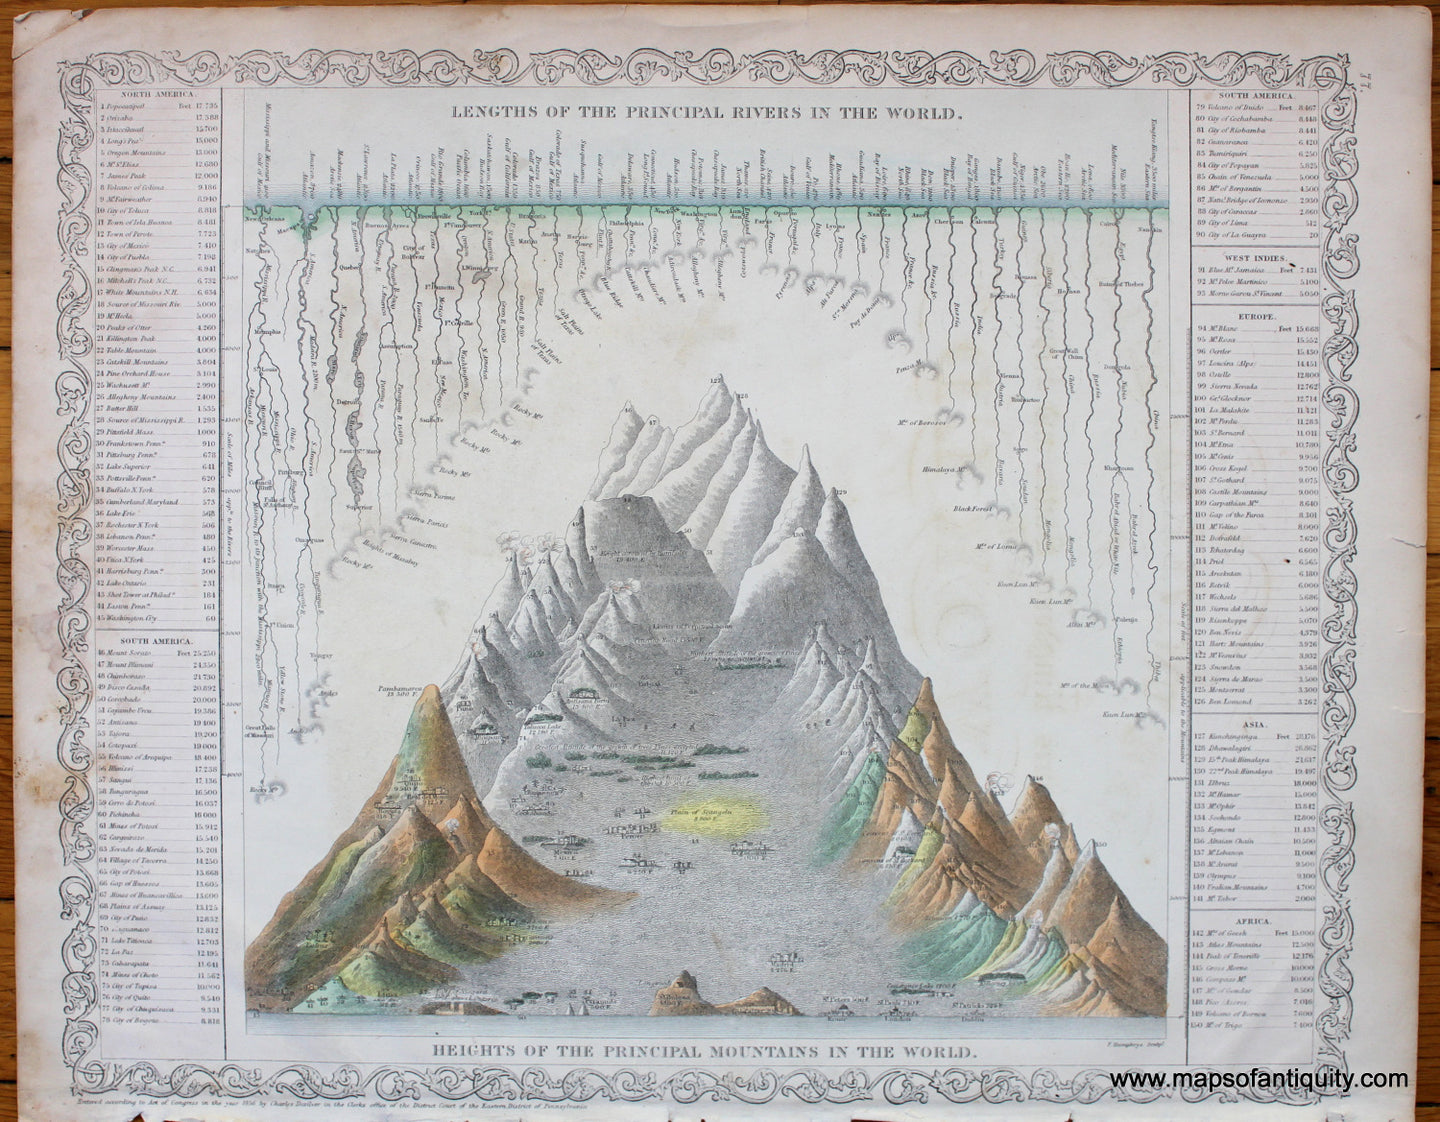 Antique-Hand-Colored-Map-Lengths-of-the-Principal-Rivers-of-the-World.-Heights-of-the-Principal-Mountains-of-the-World.-Comparative-Maps--1859-Desilver-Maps-Of-Antiquity